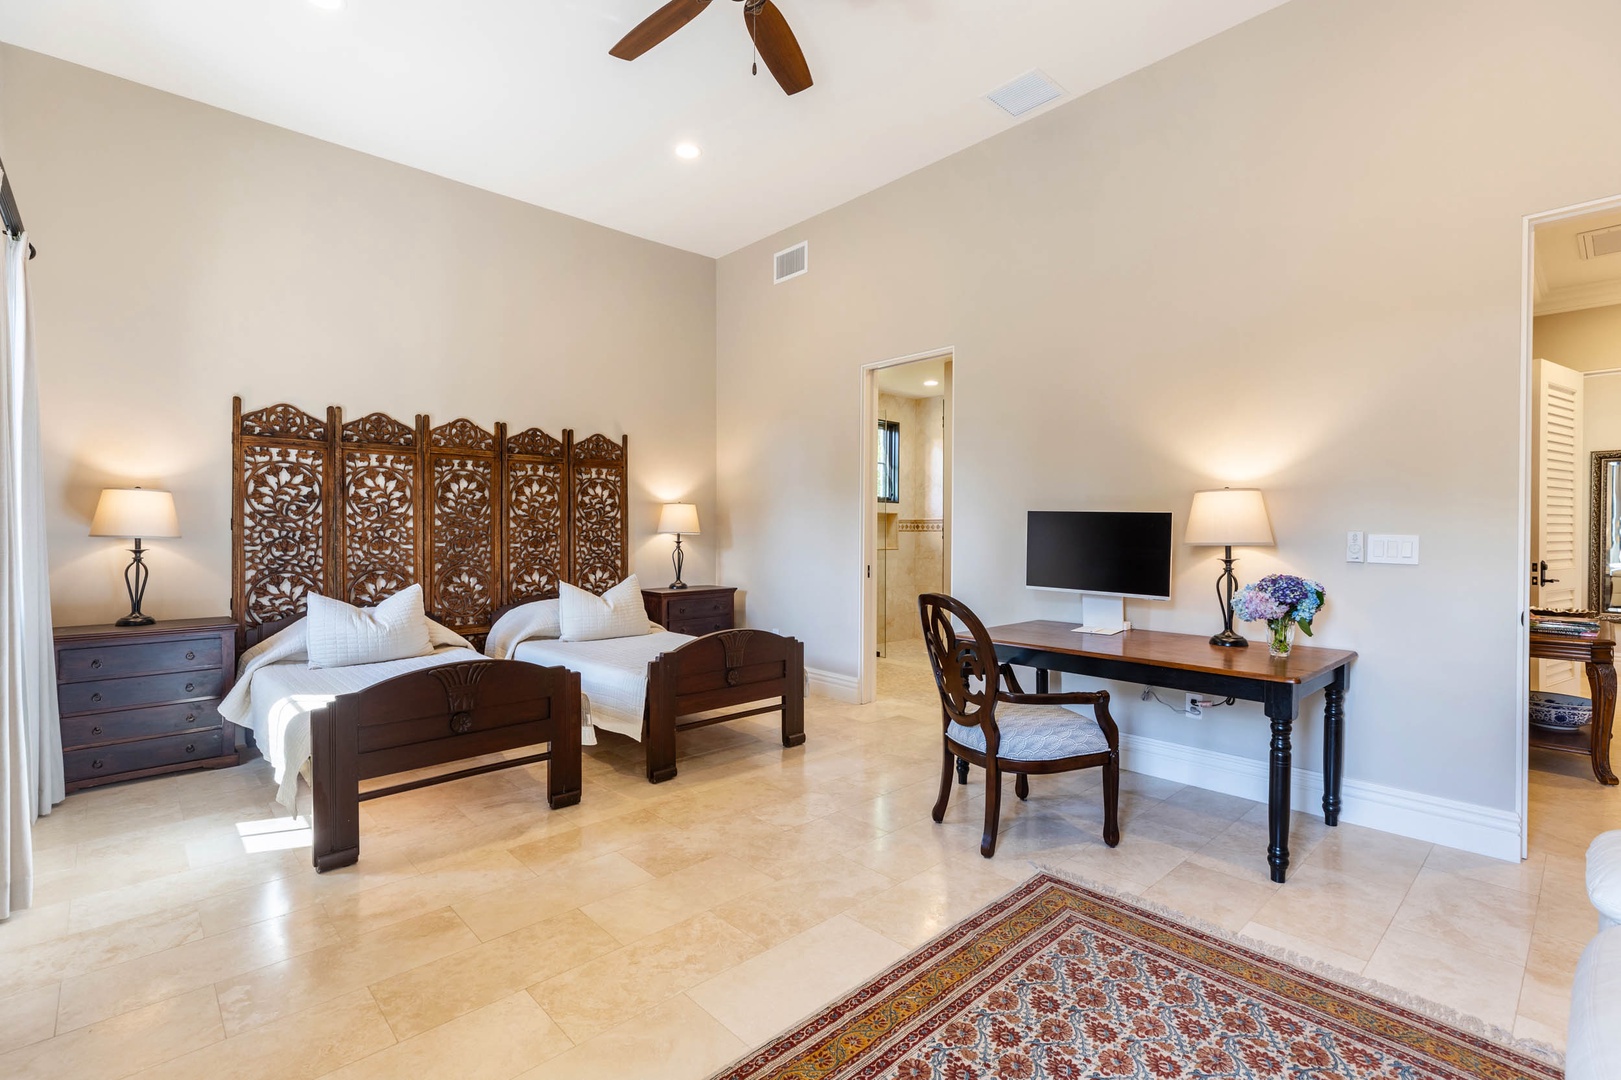 Honolulu Vacation Rentals, Royal Kahala Estate - Guest bedroom four with two twin beds.